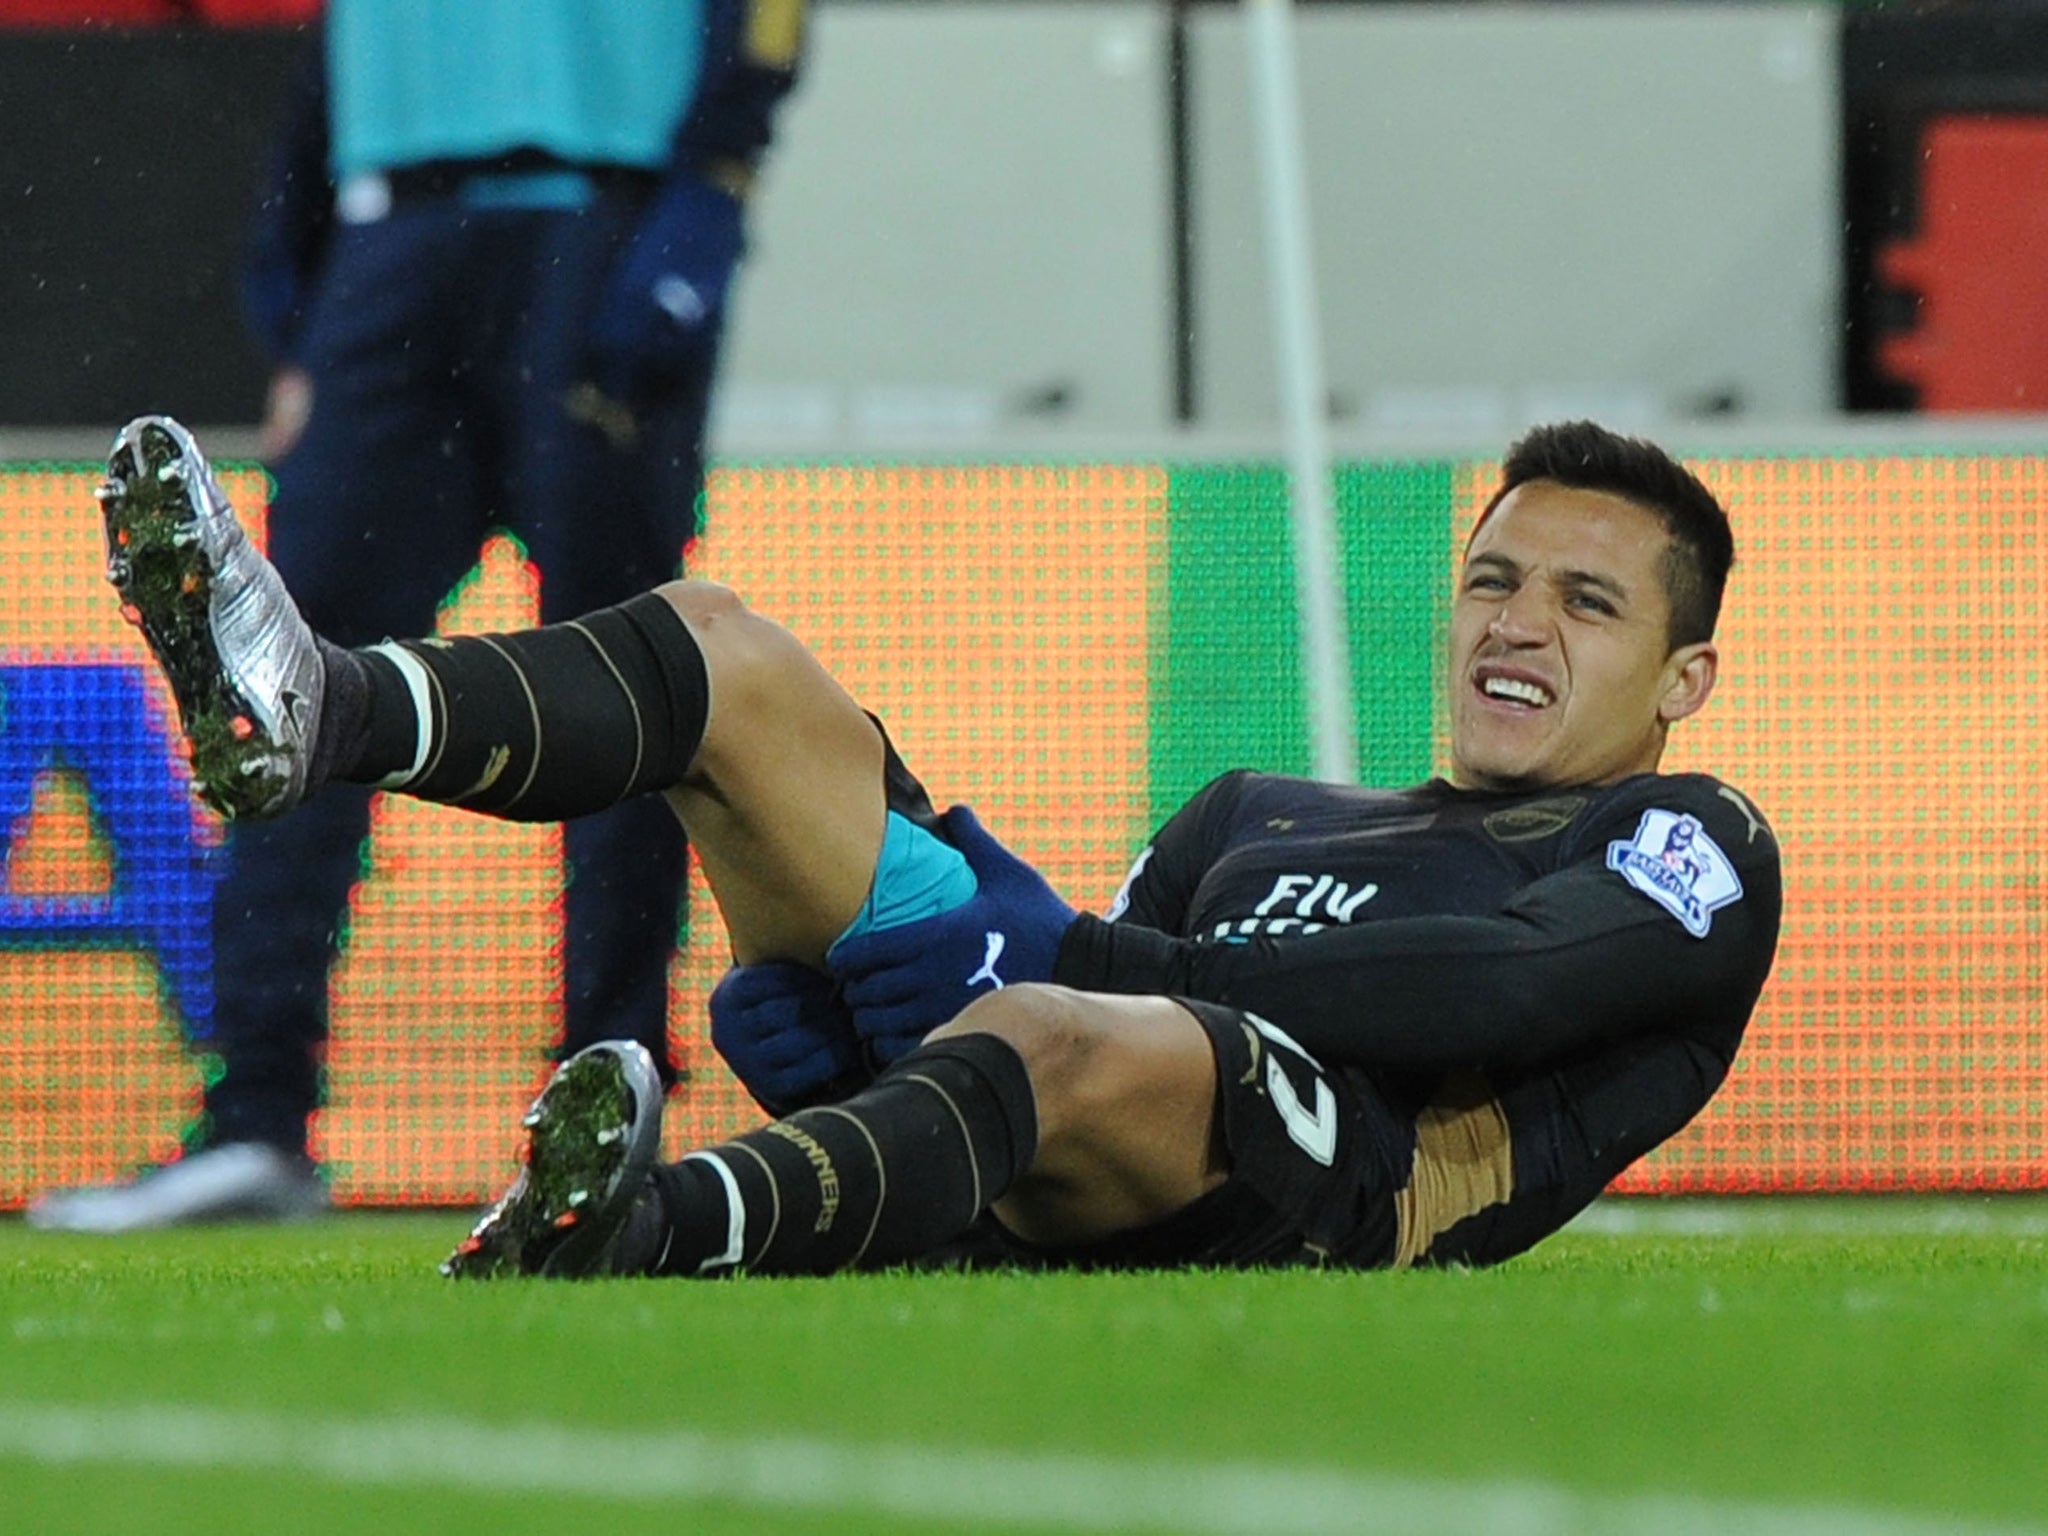 Alexis Sanchez feels his hamstring during the game against Norwich City